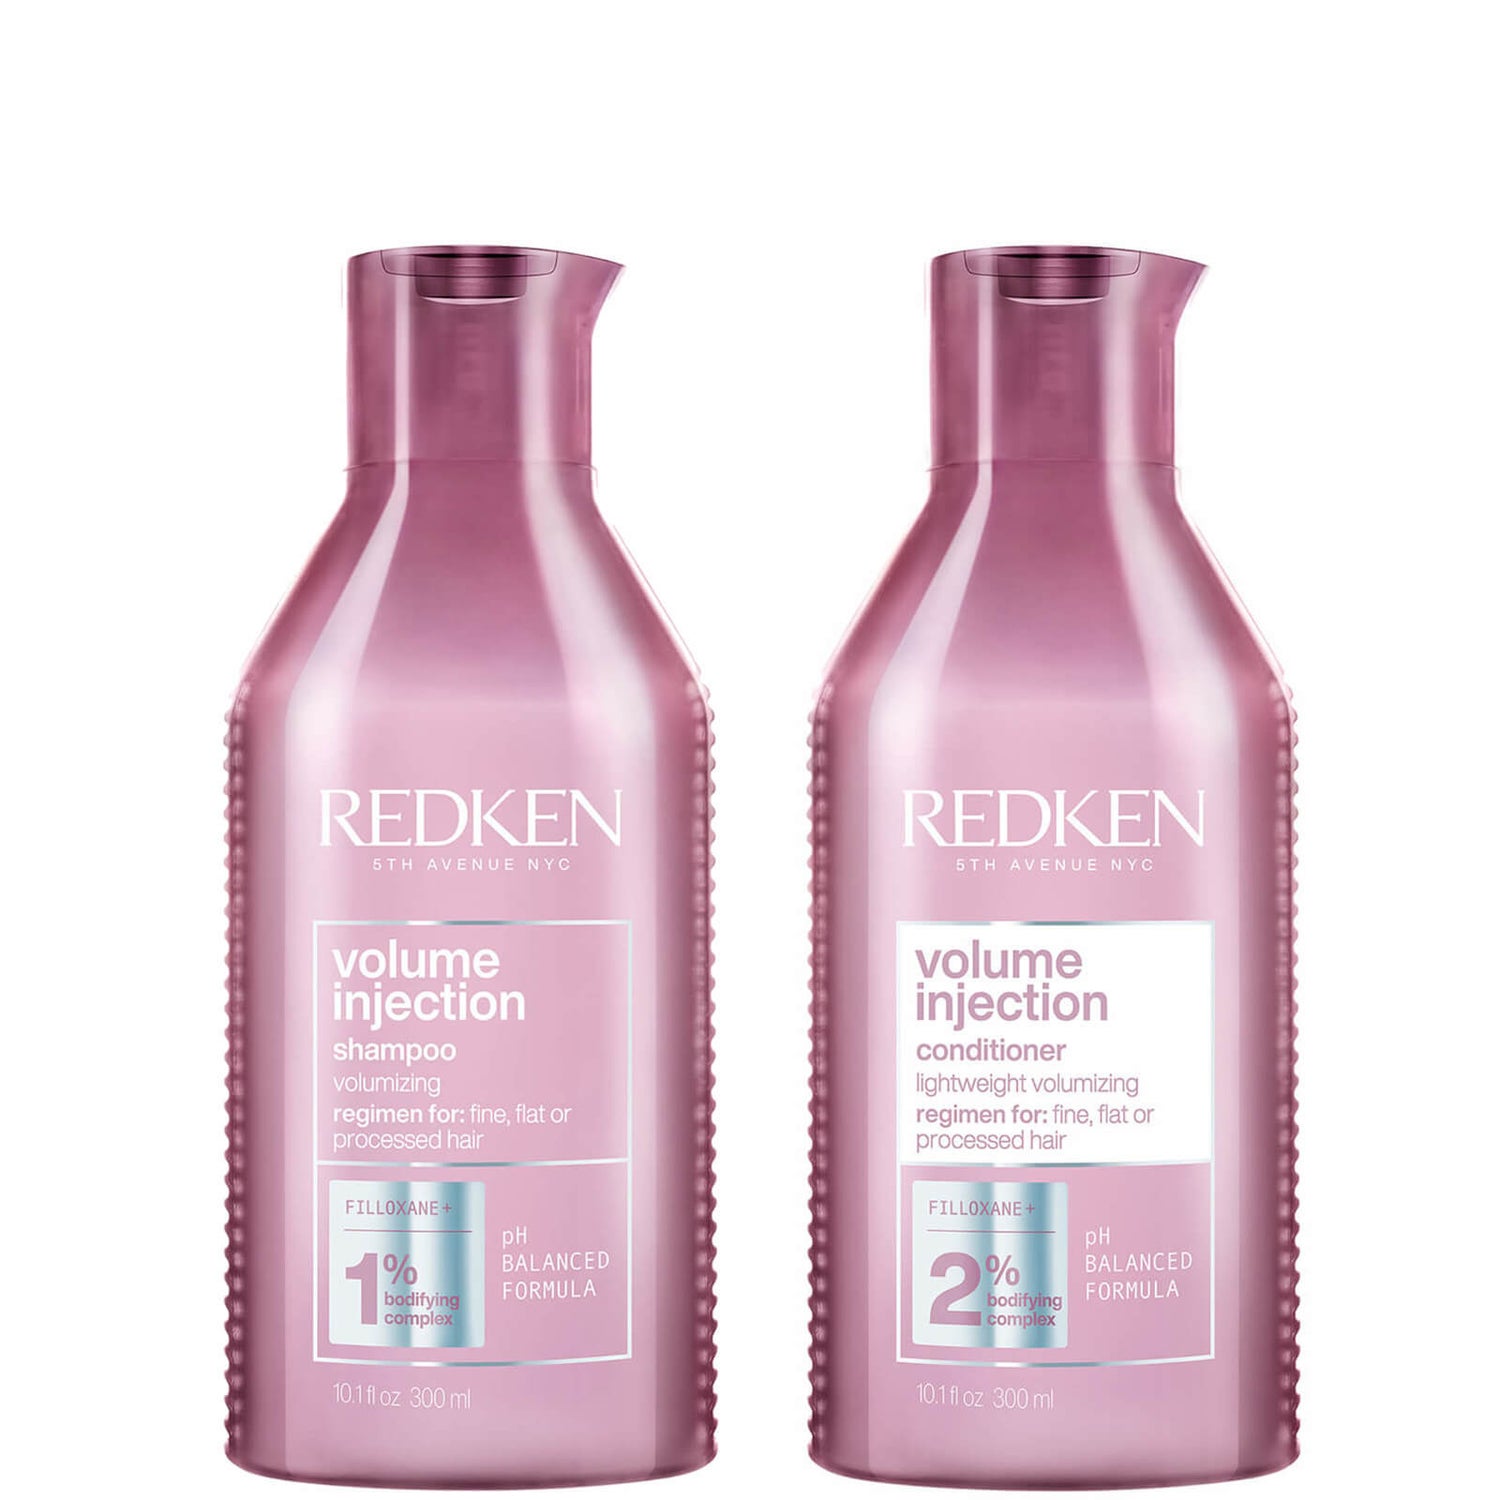 Redken Volume Injection Shampoo and Conditioner Duo (Worth $92.00)